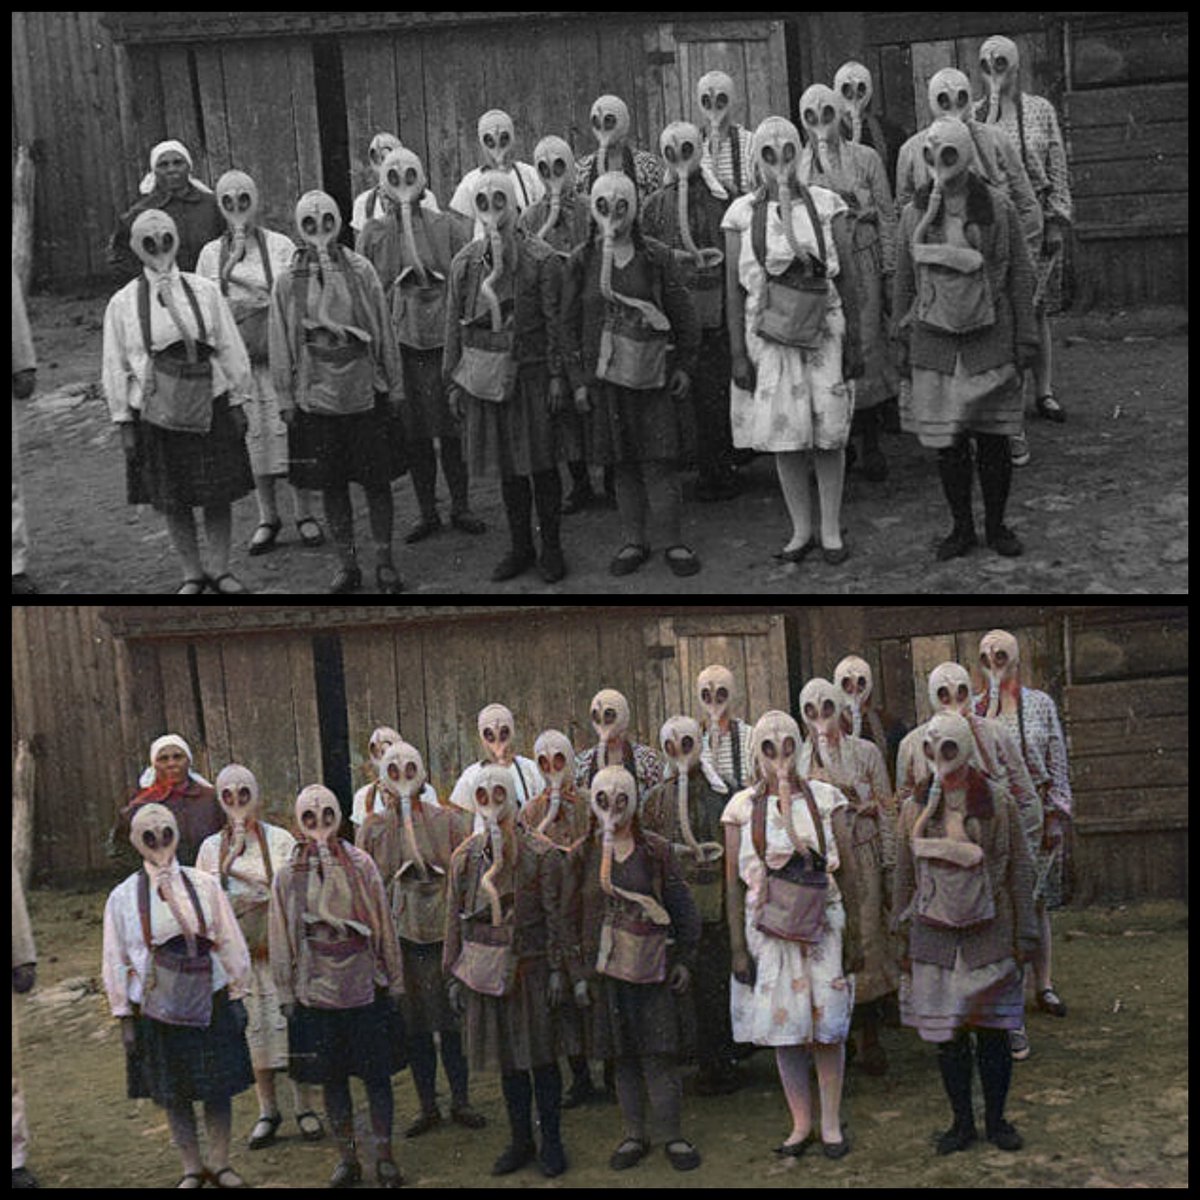 Group of young girls in gas masks during the exercise in Moscow, 1930. See more via IG 📸:instagram.com/p/Cbq4w8aLjO2